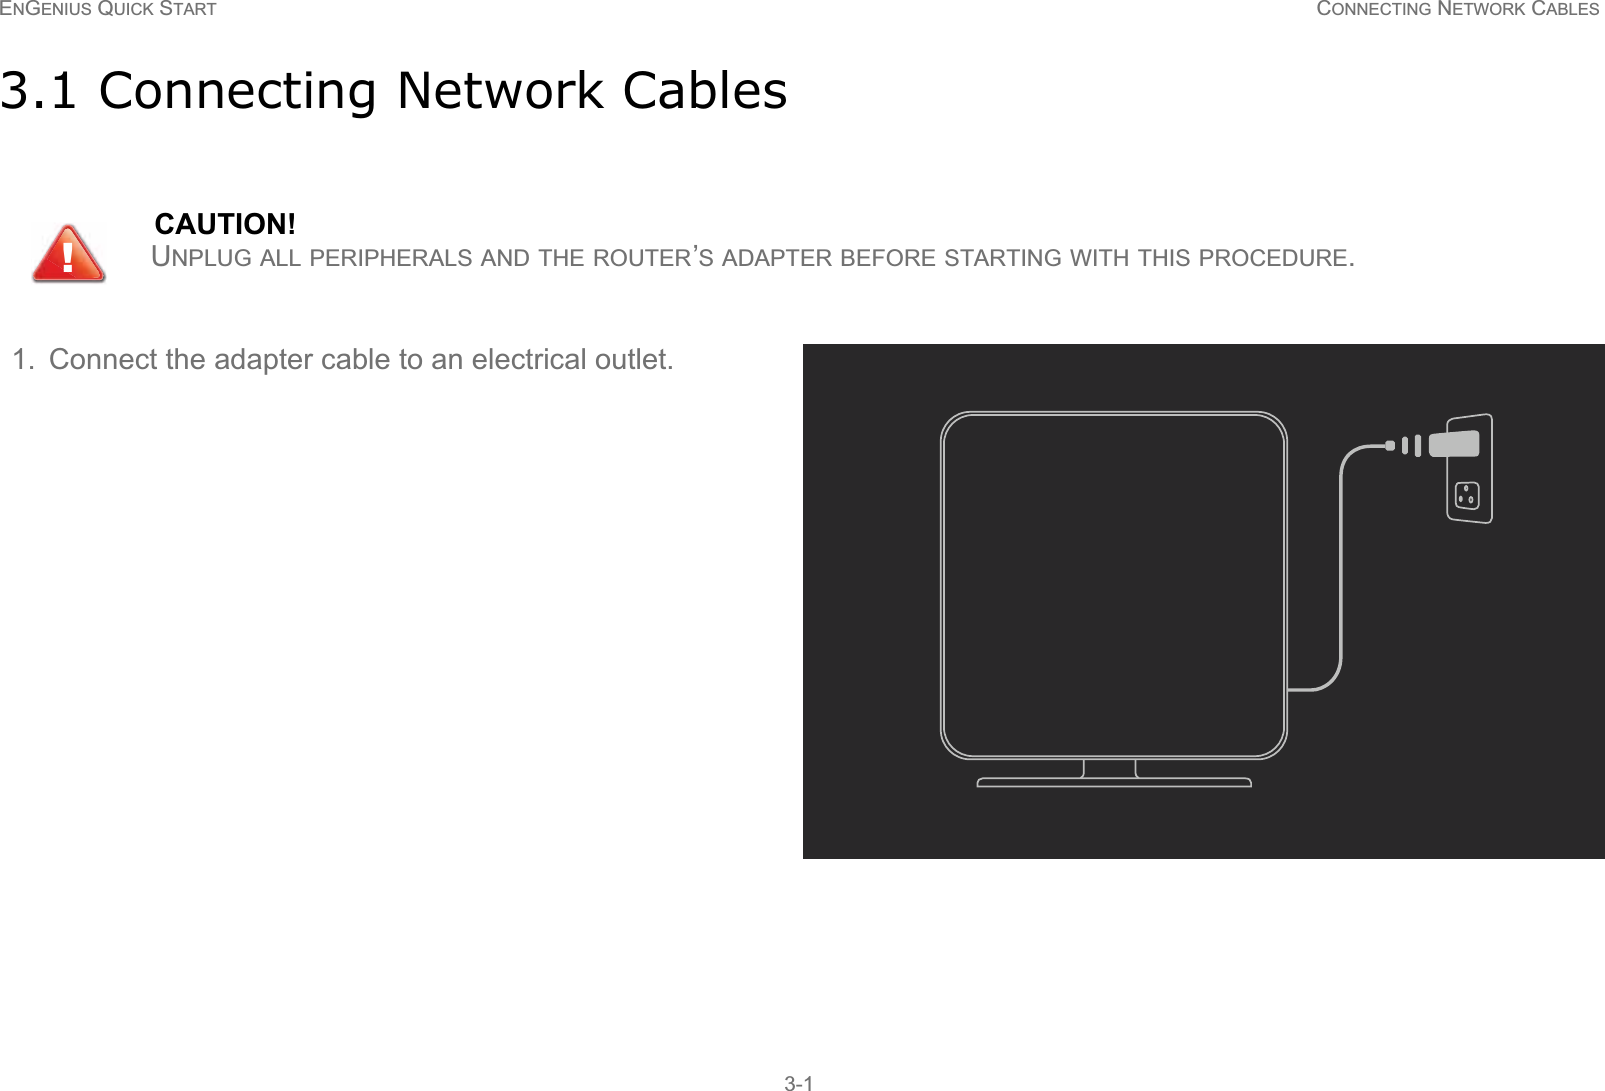 ENGENIUS QUICK START CONNECTING NETWORK CABLES3-13.1 Connecting Network CablesCAUTION!UNPLUG ALL PERIPHERALS AND THE ROUTER’S ADAPTER BEFORE STARTING WITH THIS PROCEDURE.1. Connect the adapter cable to an electrical outlet. !